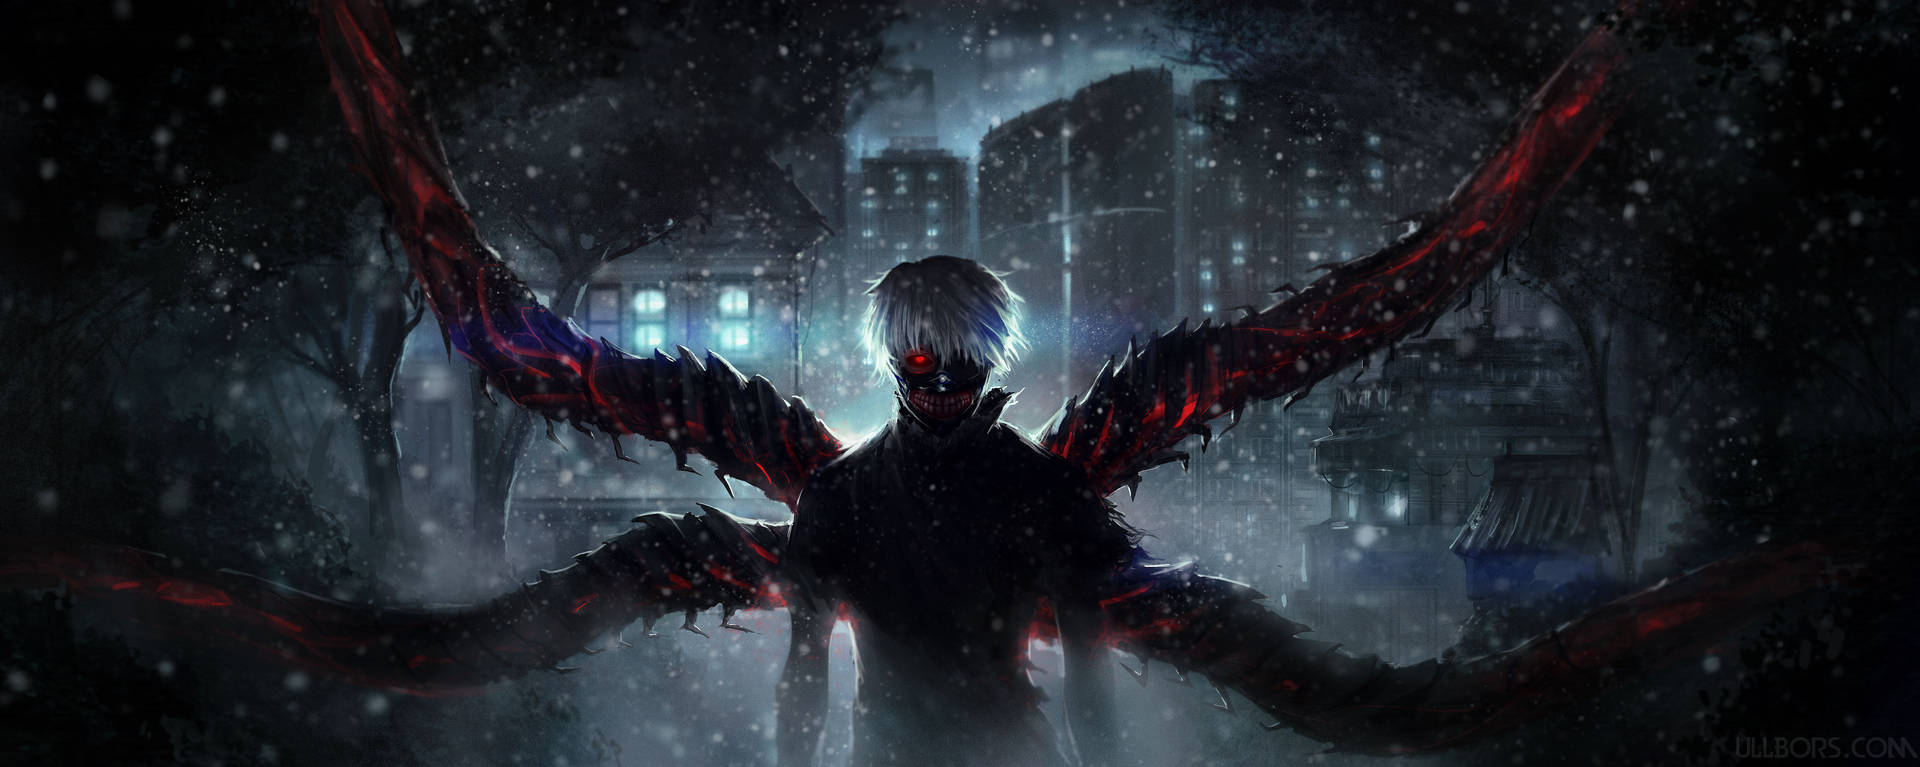 Kaneki Ken unleashes his ghoul powers and stares down his opponents on the battlefield Wallpaper